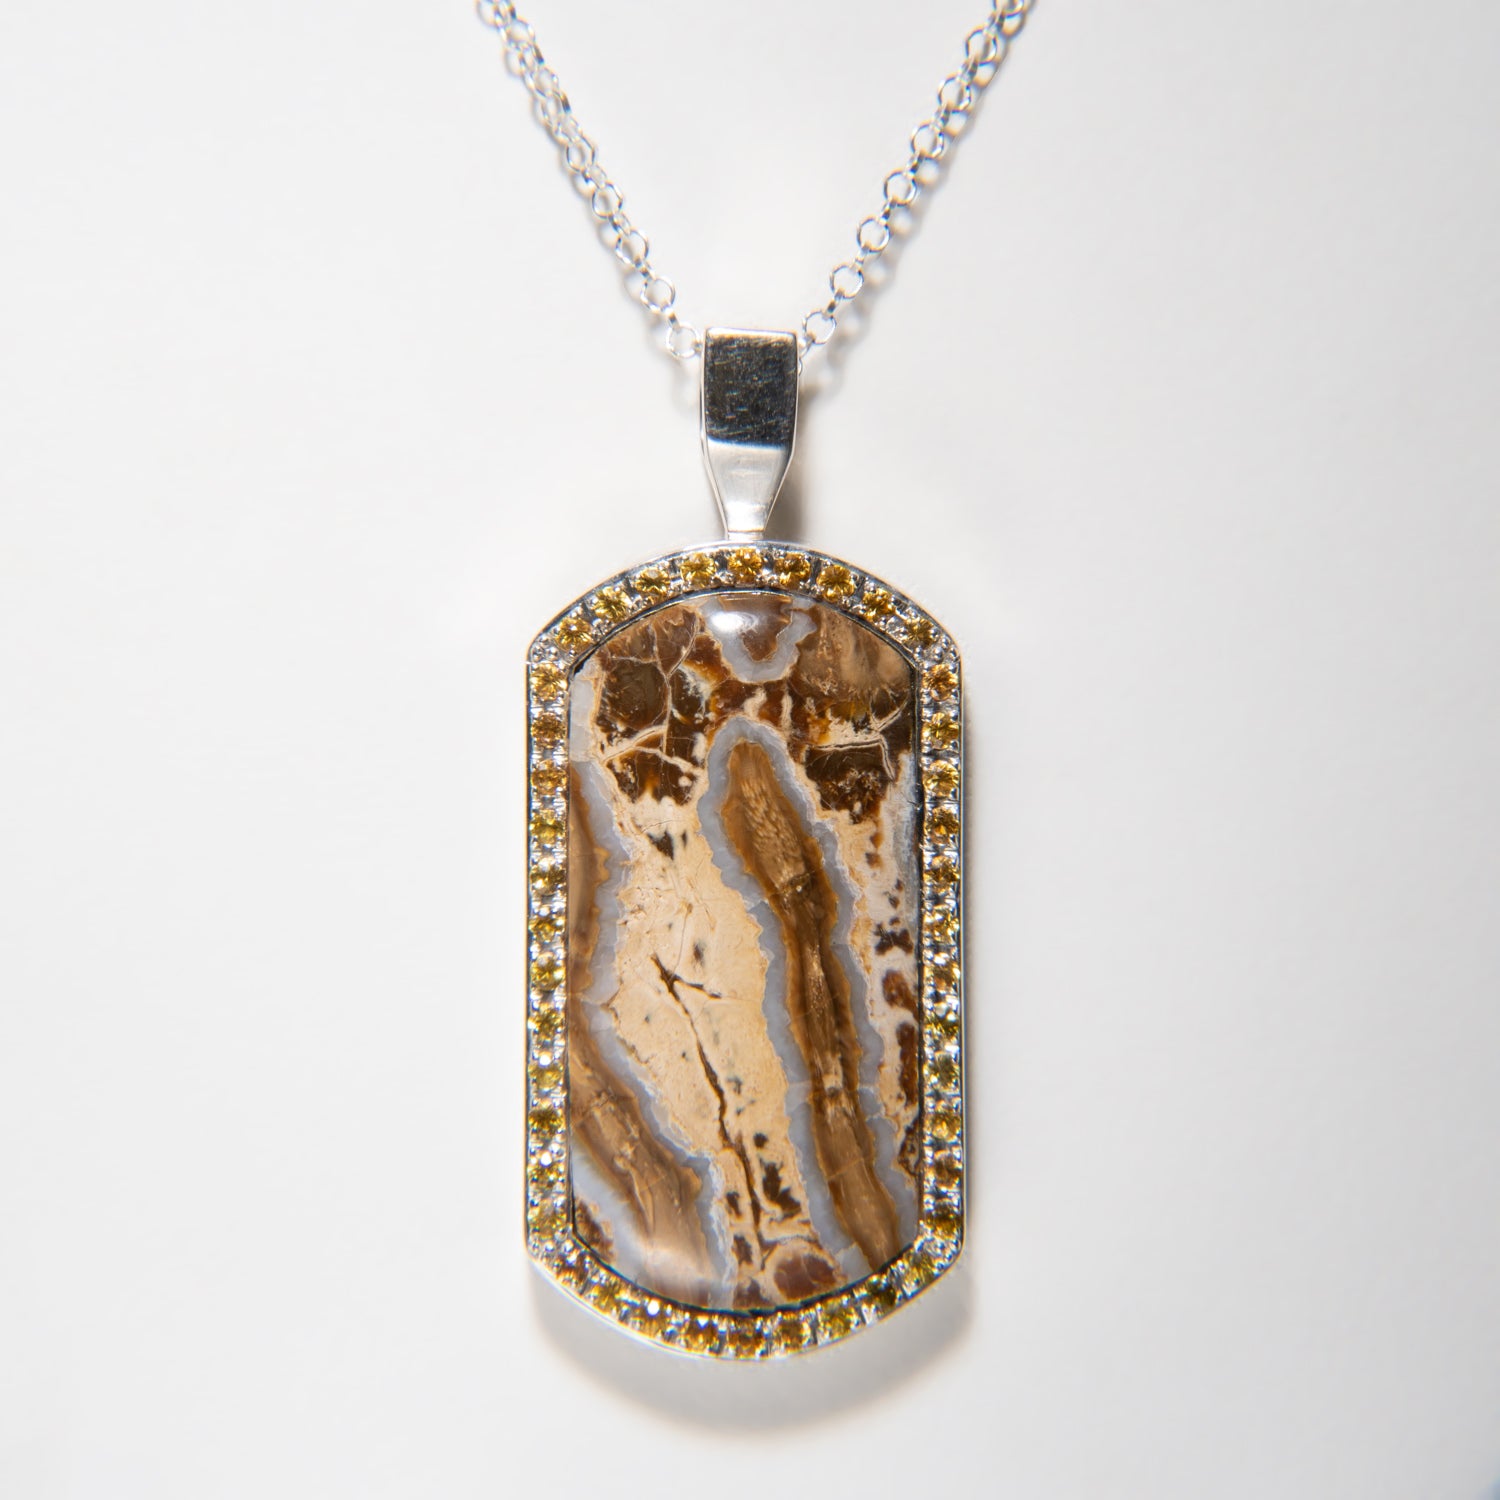 Genuine Mammoth Tooth with Yellow Saphire Pendant with Sterling Silver Chain Necklace